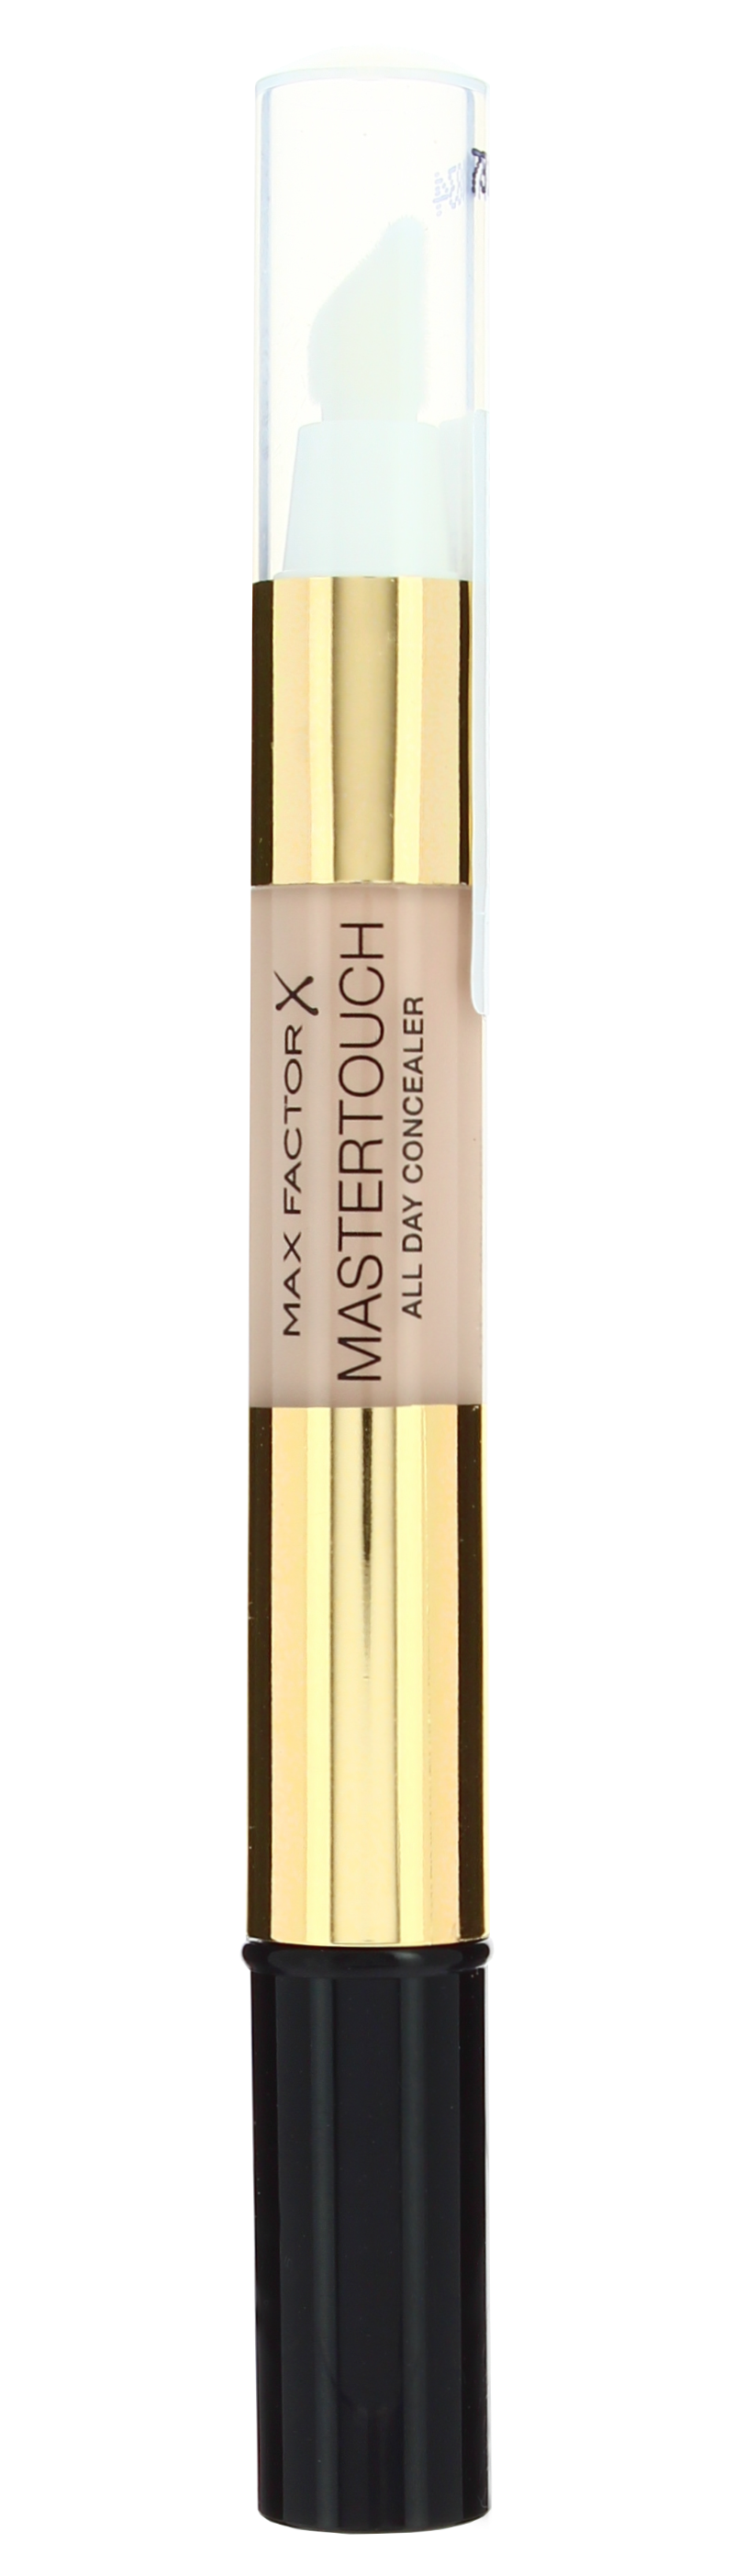 Max Factor Mastertouch Concealer 306 ml